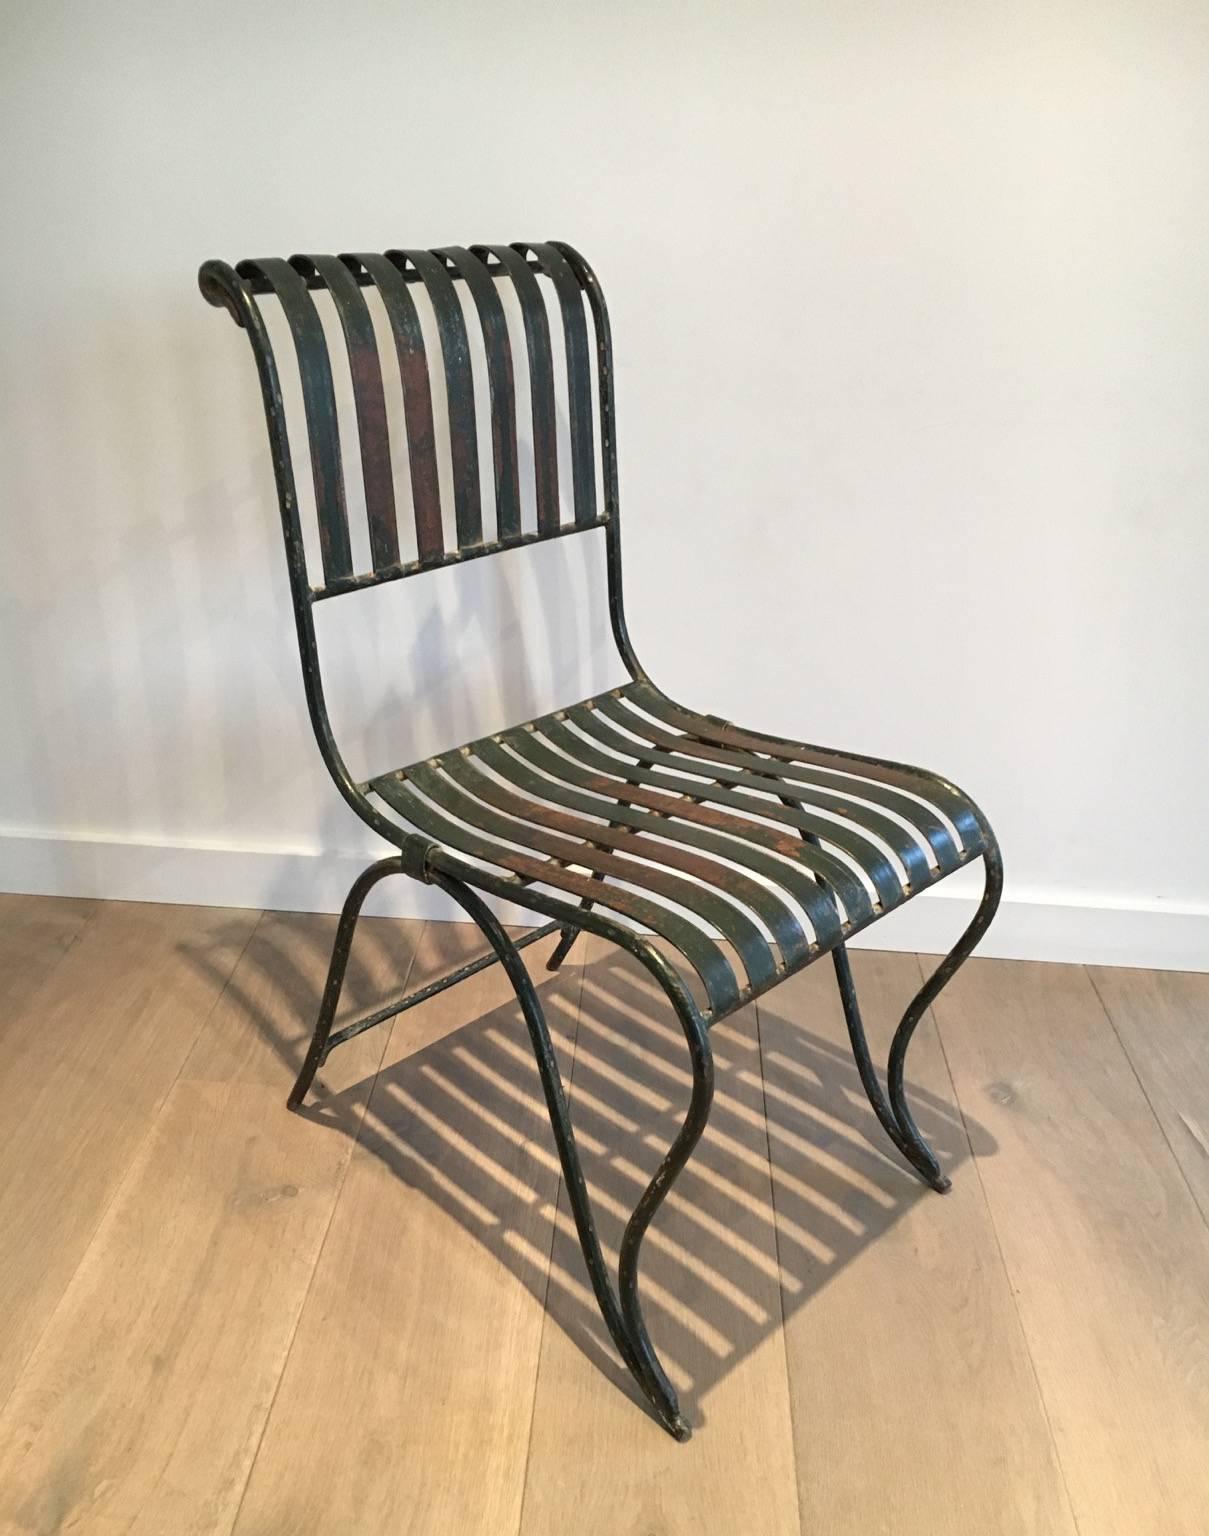 An unusual wrought iron garden chair with a beautiful painted dark green painted patina. French, circa late 19th century. 


This item is currently in France, please allow 2 to 4 weeks delivery to New York. Shipping costs from France to our